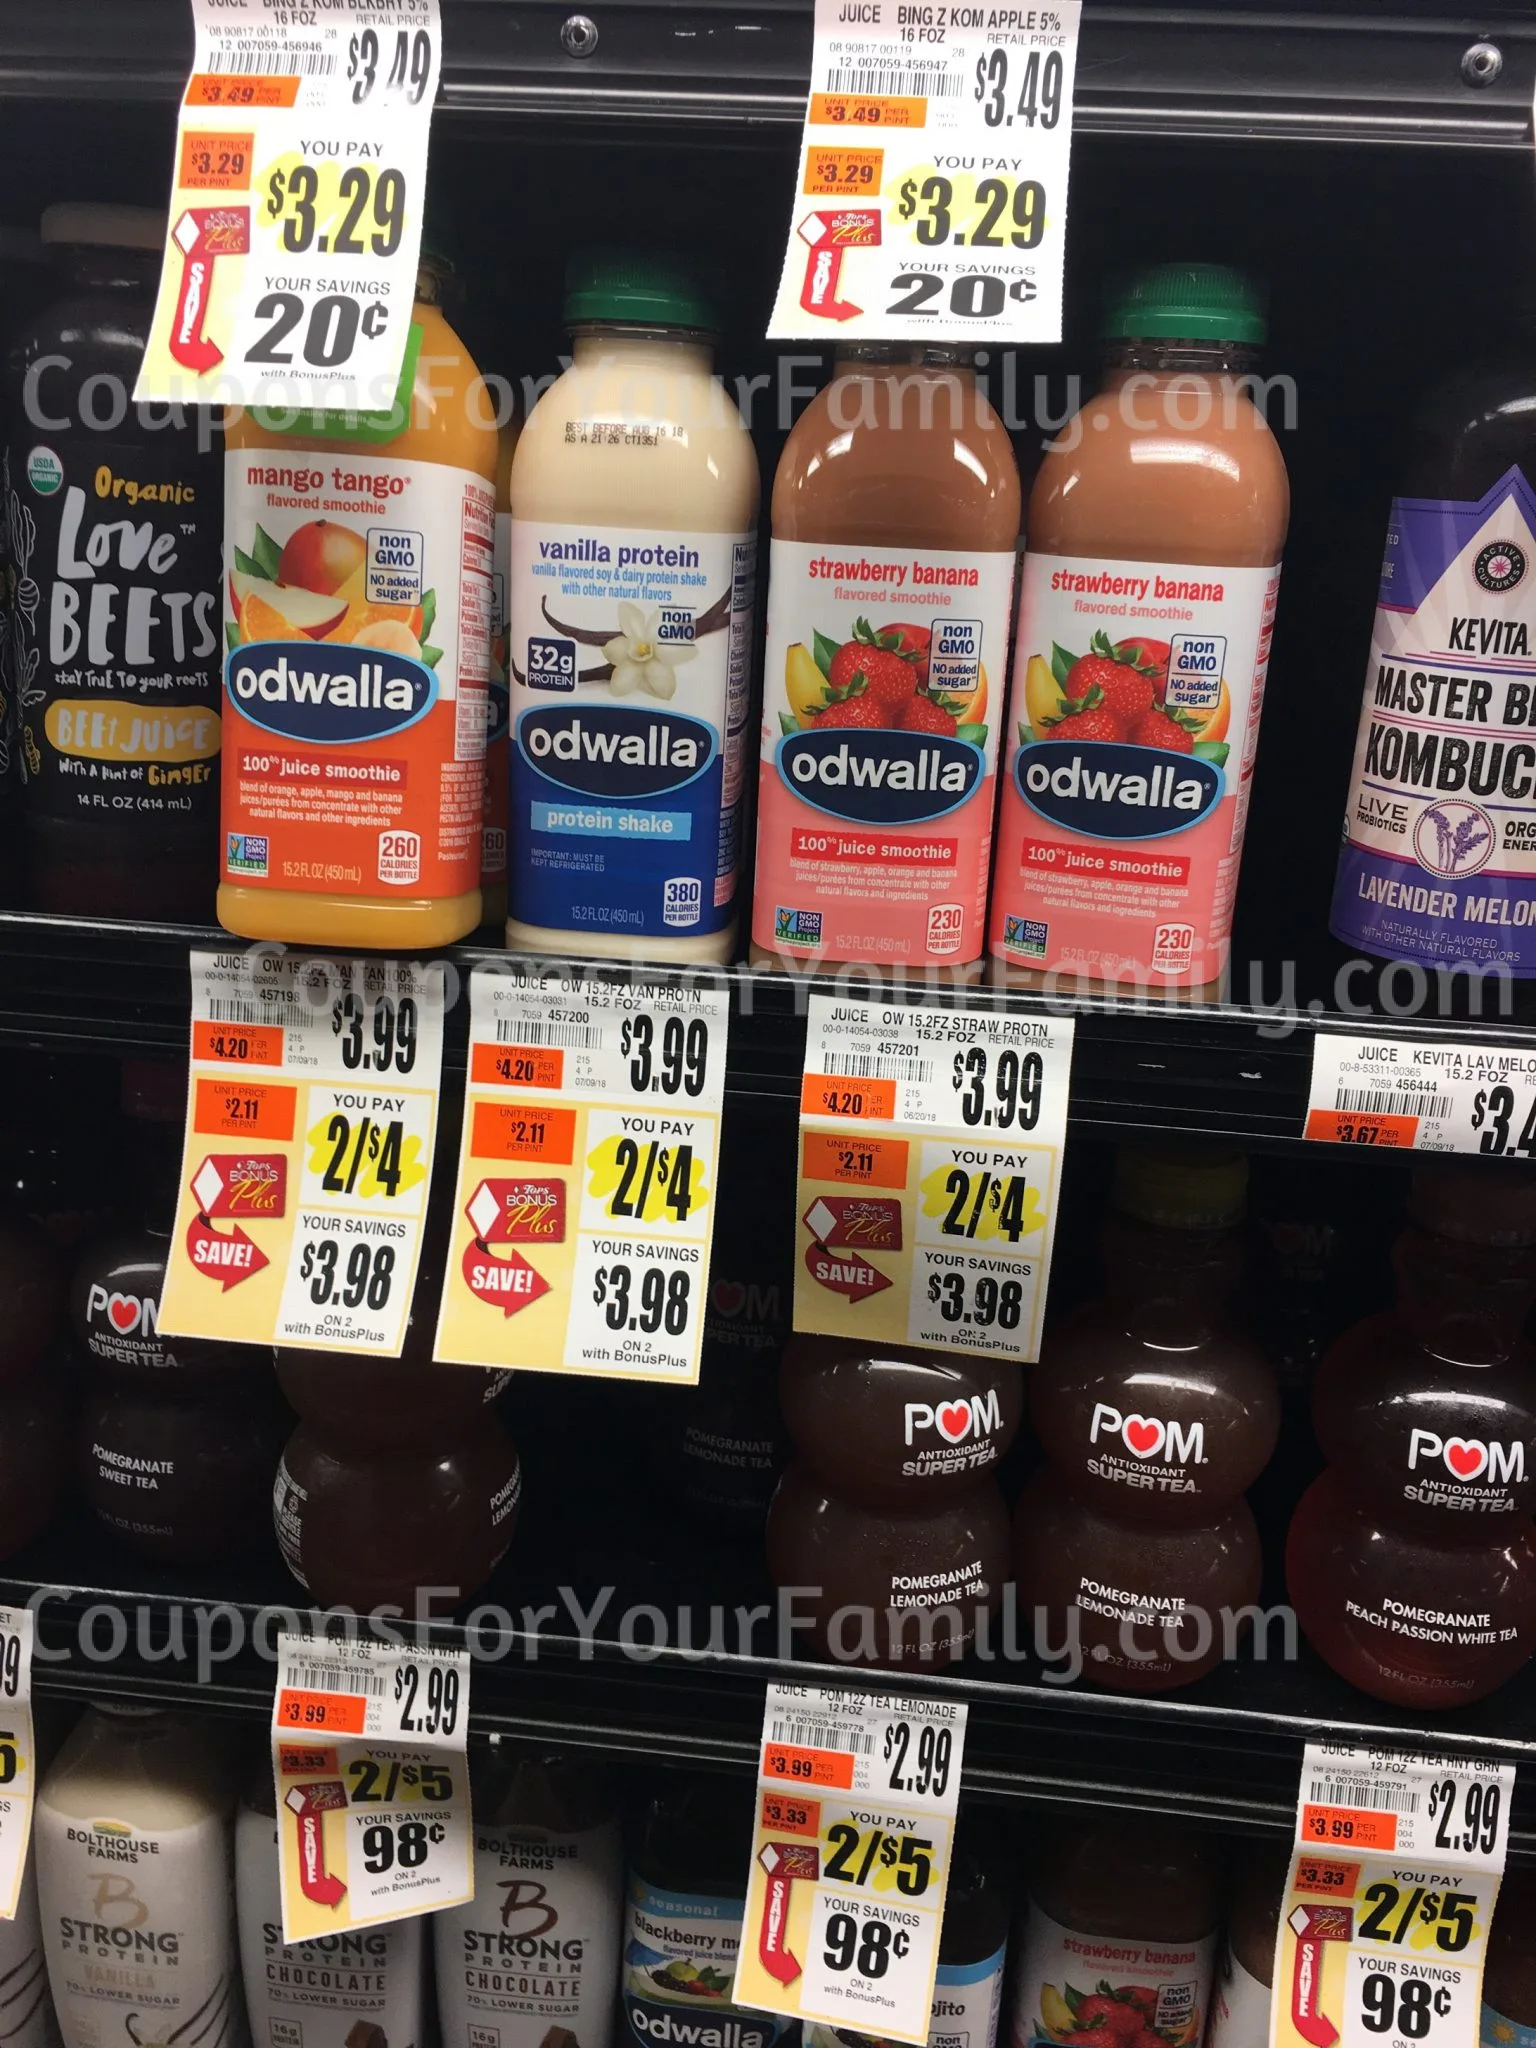 odwalla jucie coupon